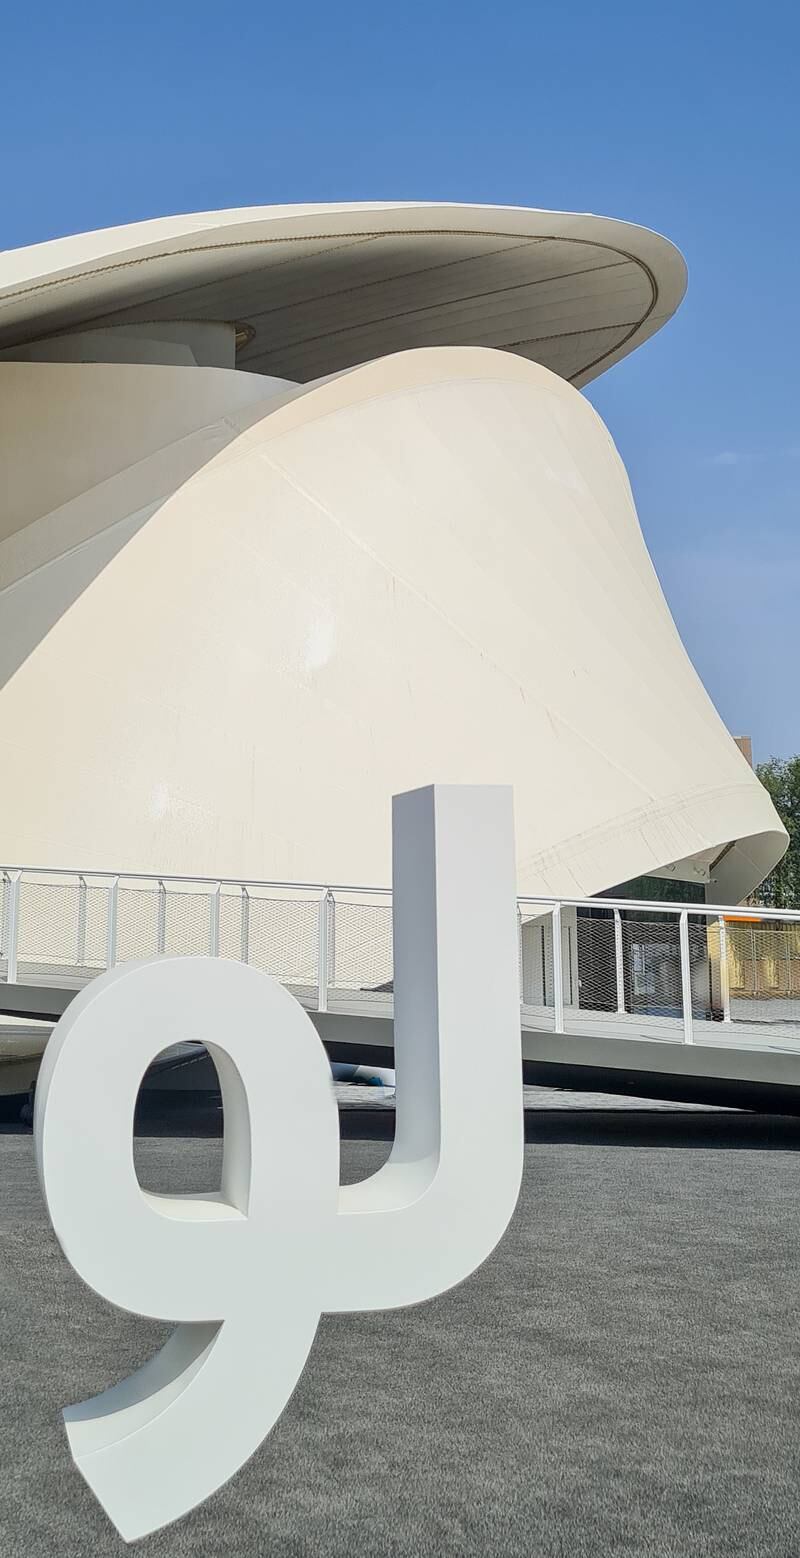 The Luxembourg Pavilion at the World Expo in Dubai comprises of a three-storey slide made of plexi-glass and stainless steel. Photo: Luxembourg Pavilion